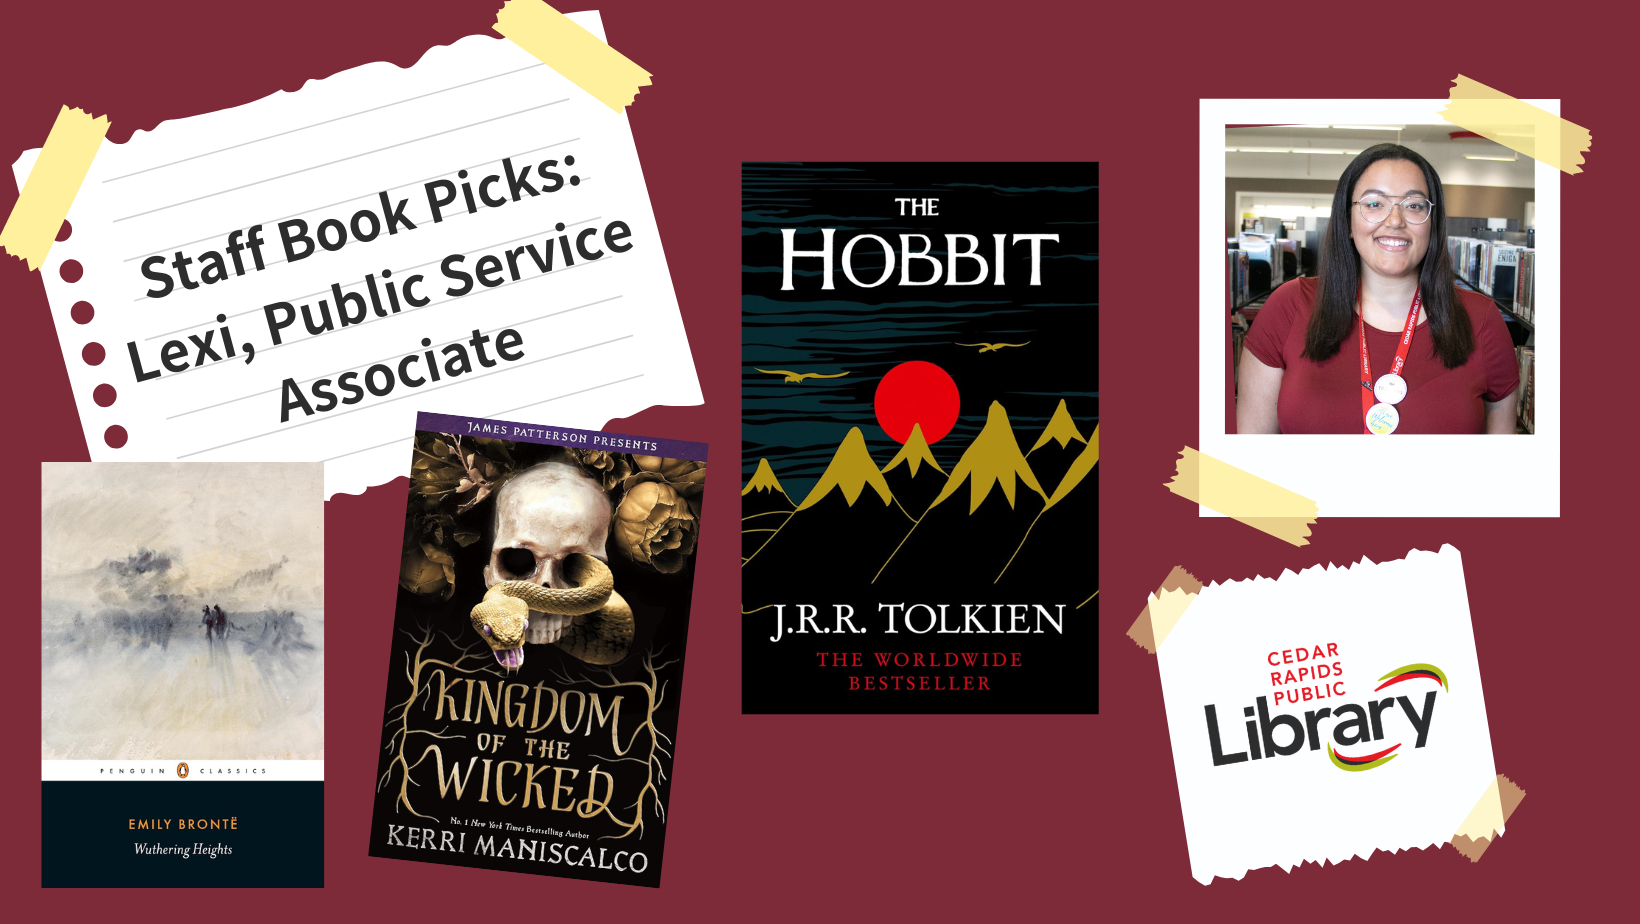 A graphic says "Staff Book Picks: Lexi, Public Service Associate" with a photo of Lexi and three book covers: "Wuthering Heights," "Kingdom of the Wicked" and "The Hobbit."